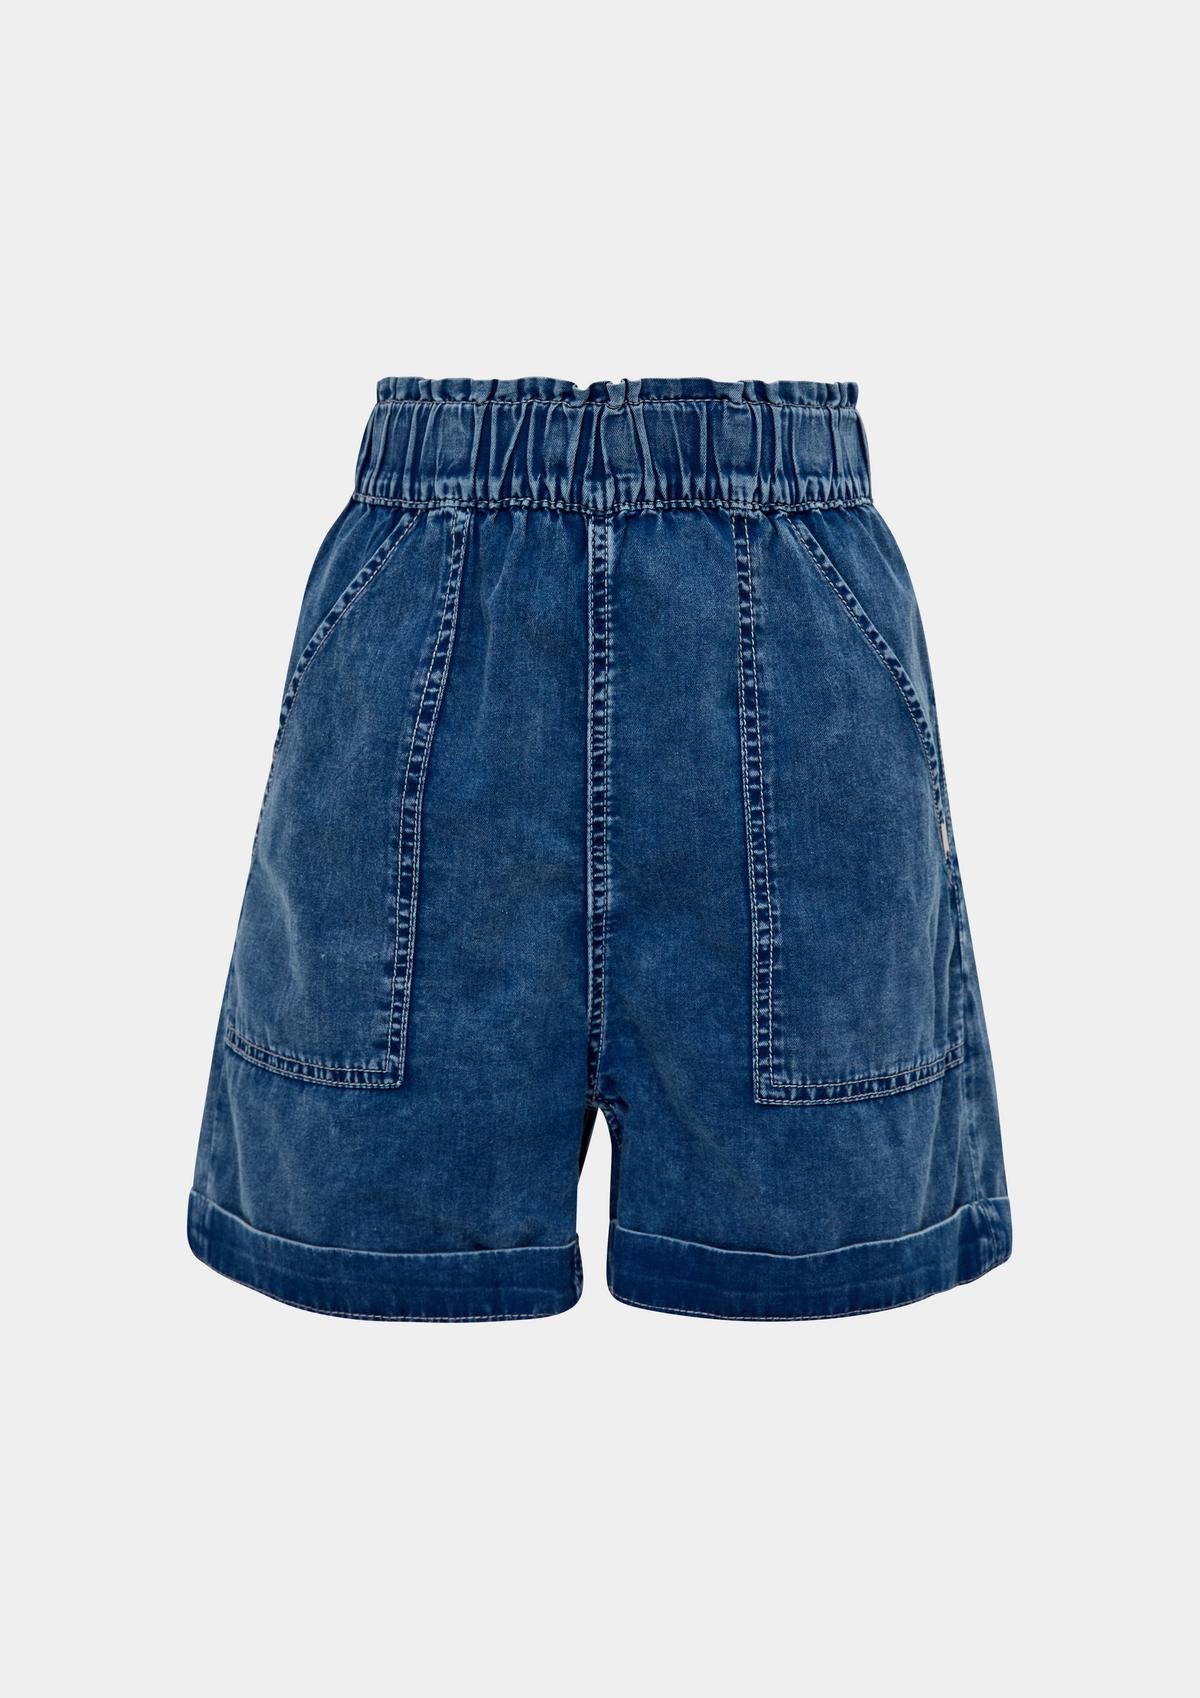 s.Oliver Denim shorts with a paperbag waistband